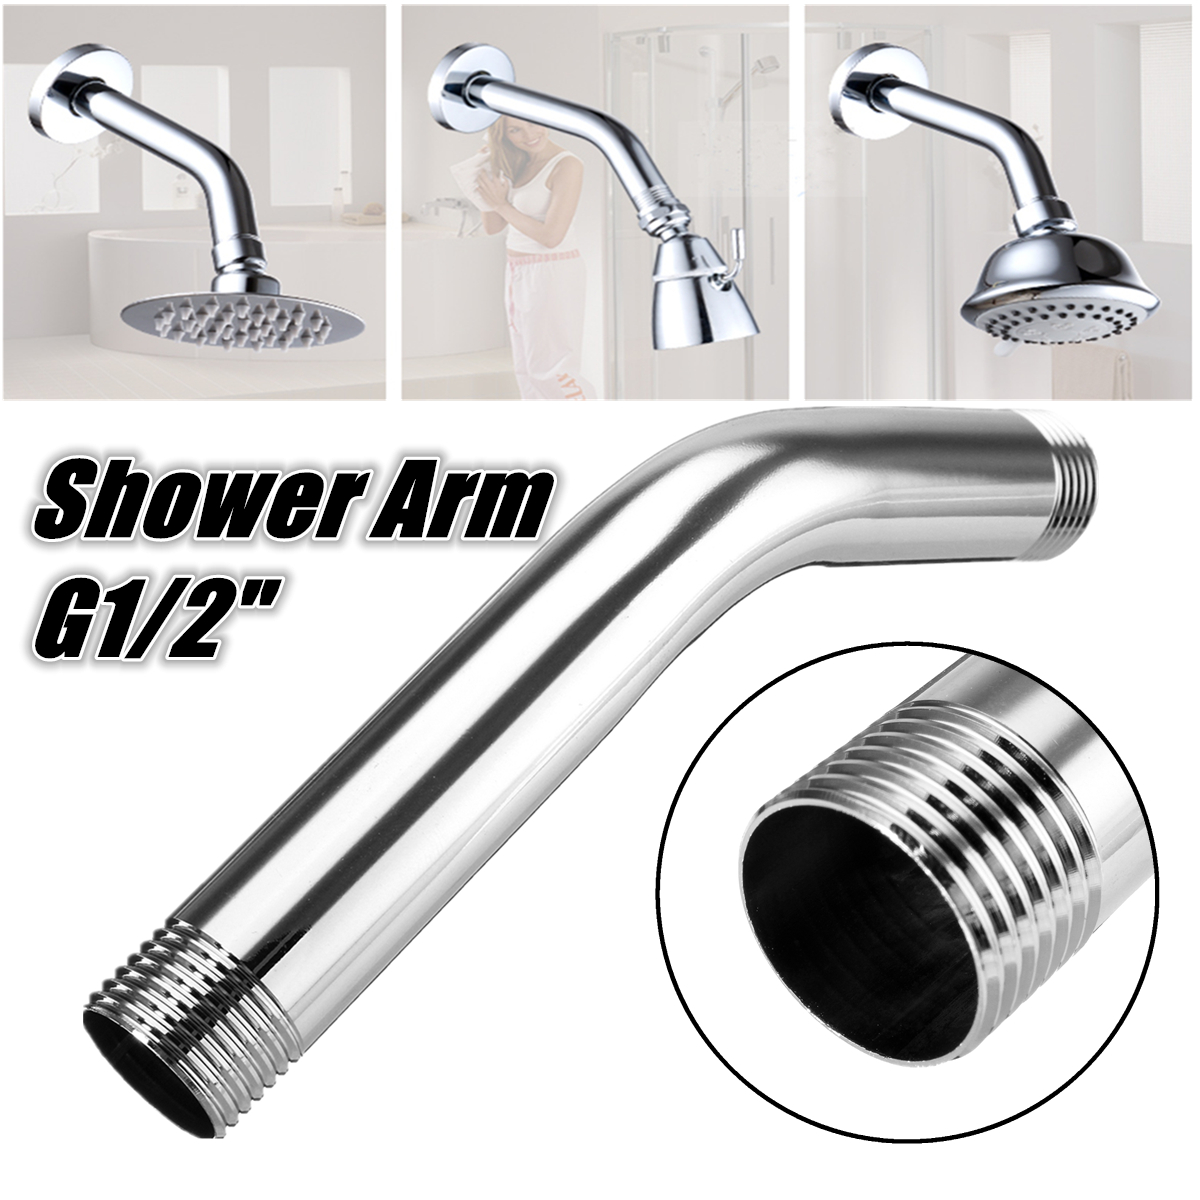 G1/2" 15cm Stainless Steel Shower Head Extension Angled Shower Arm Extra Pipe 